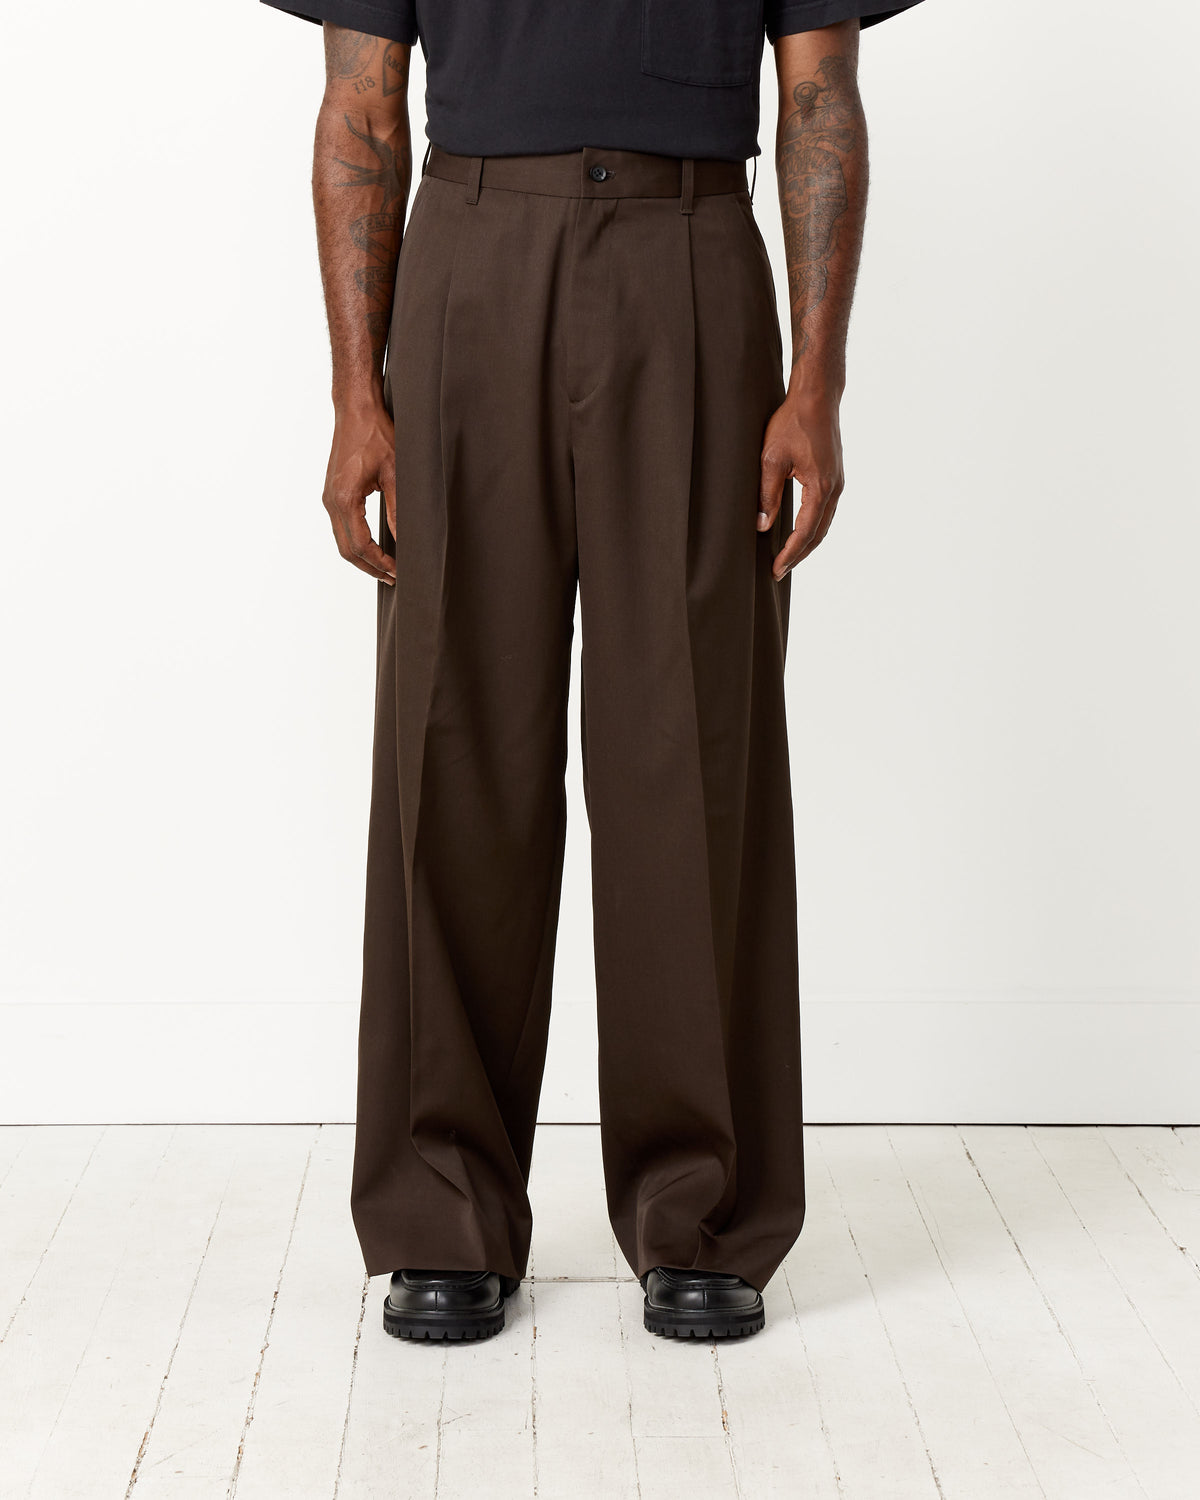 Find our carefully selected selection of premium St.646 Pant Stein